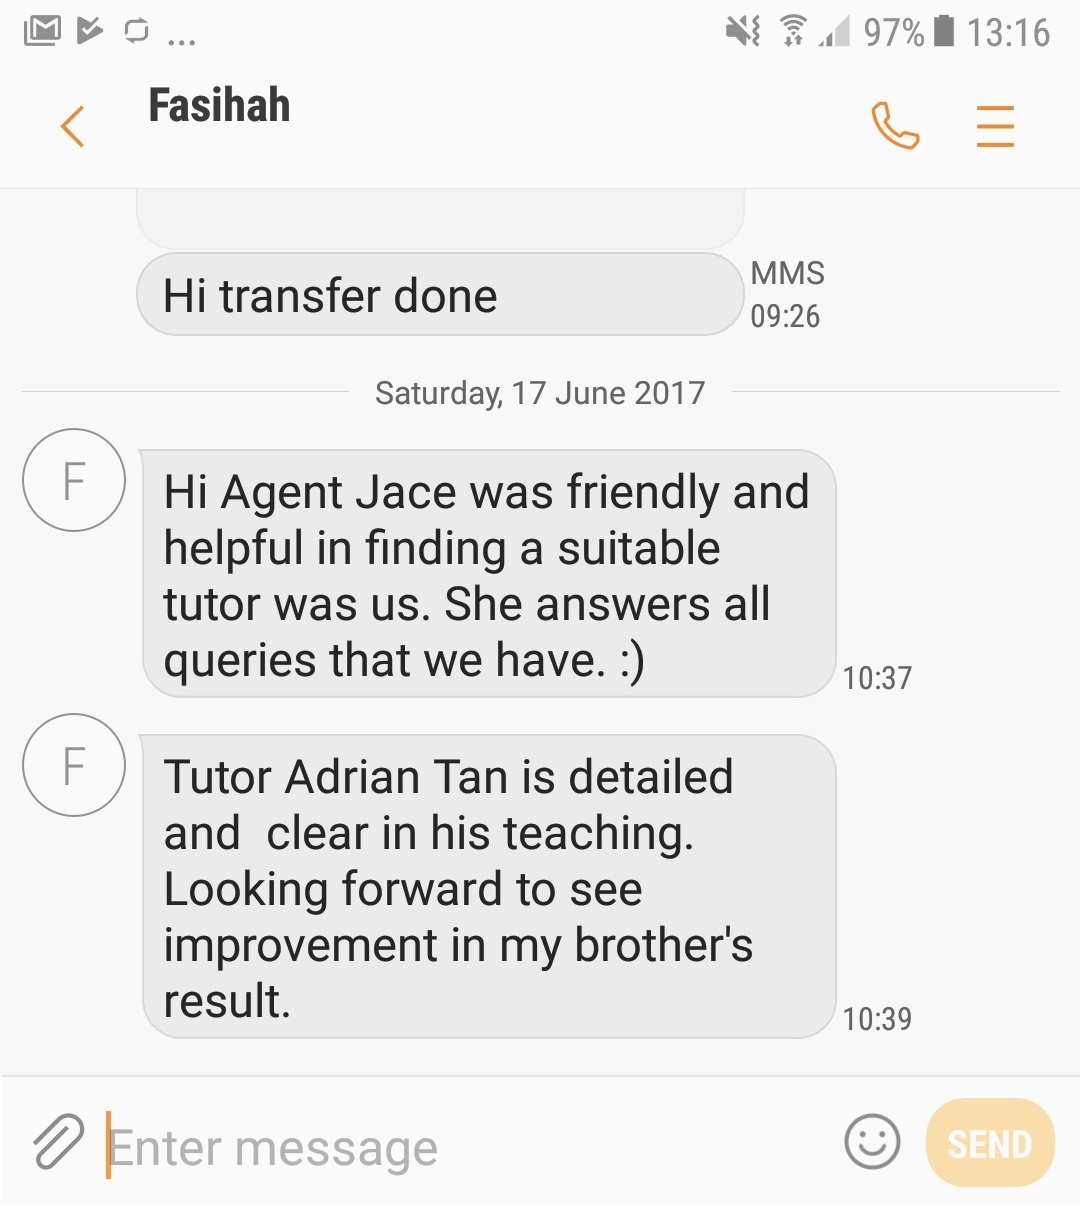 Review from Fasihah: Agent Jace was friendly and helpful in finding a suitable tutor for us. She answers all queries that we have :)